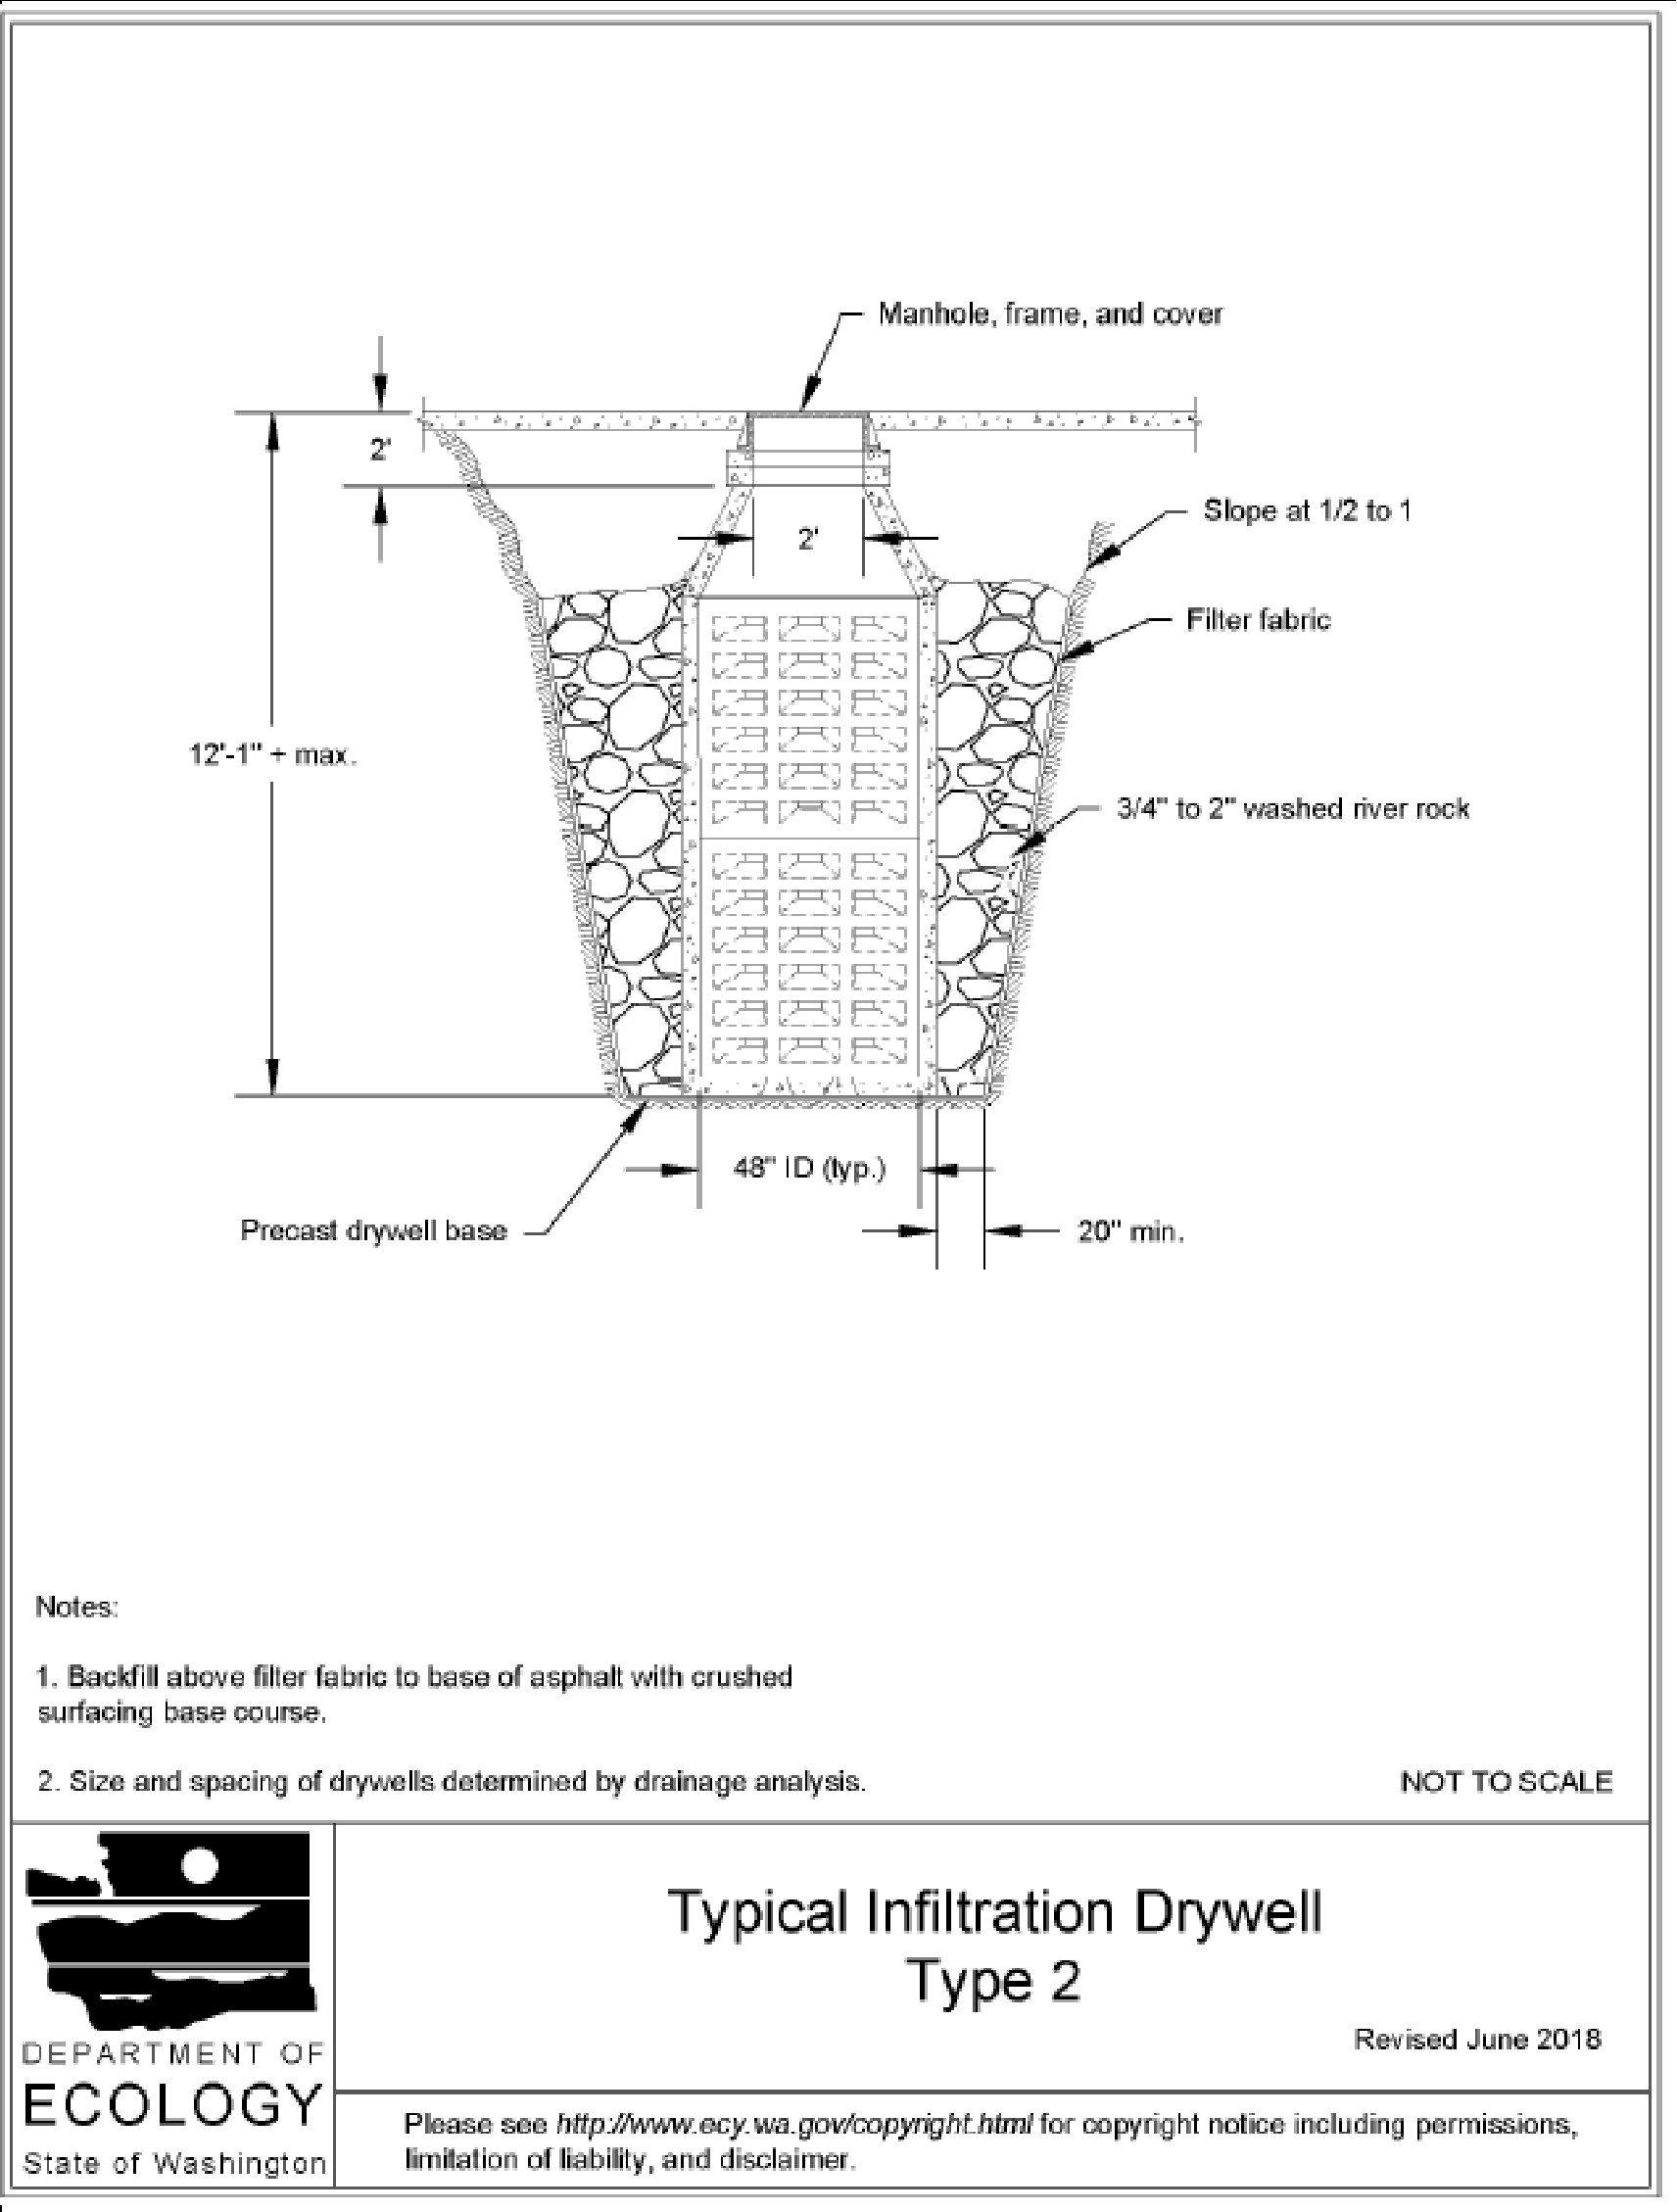 Figure 4-13 Typical Infiltration Drywell Type 2